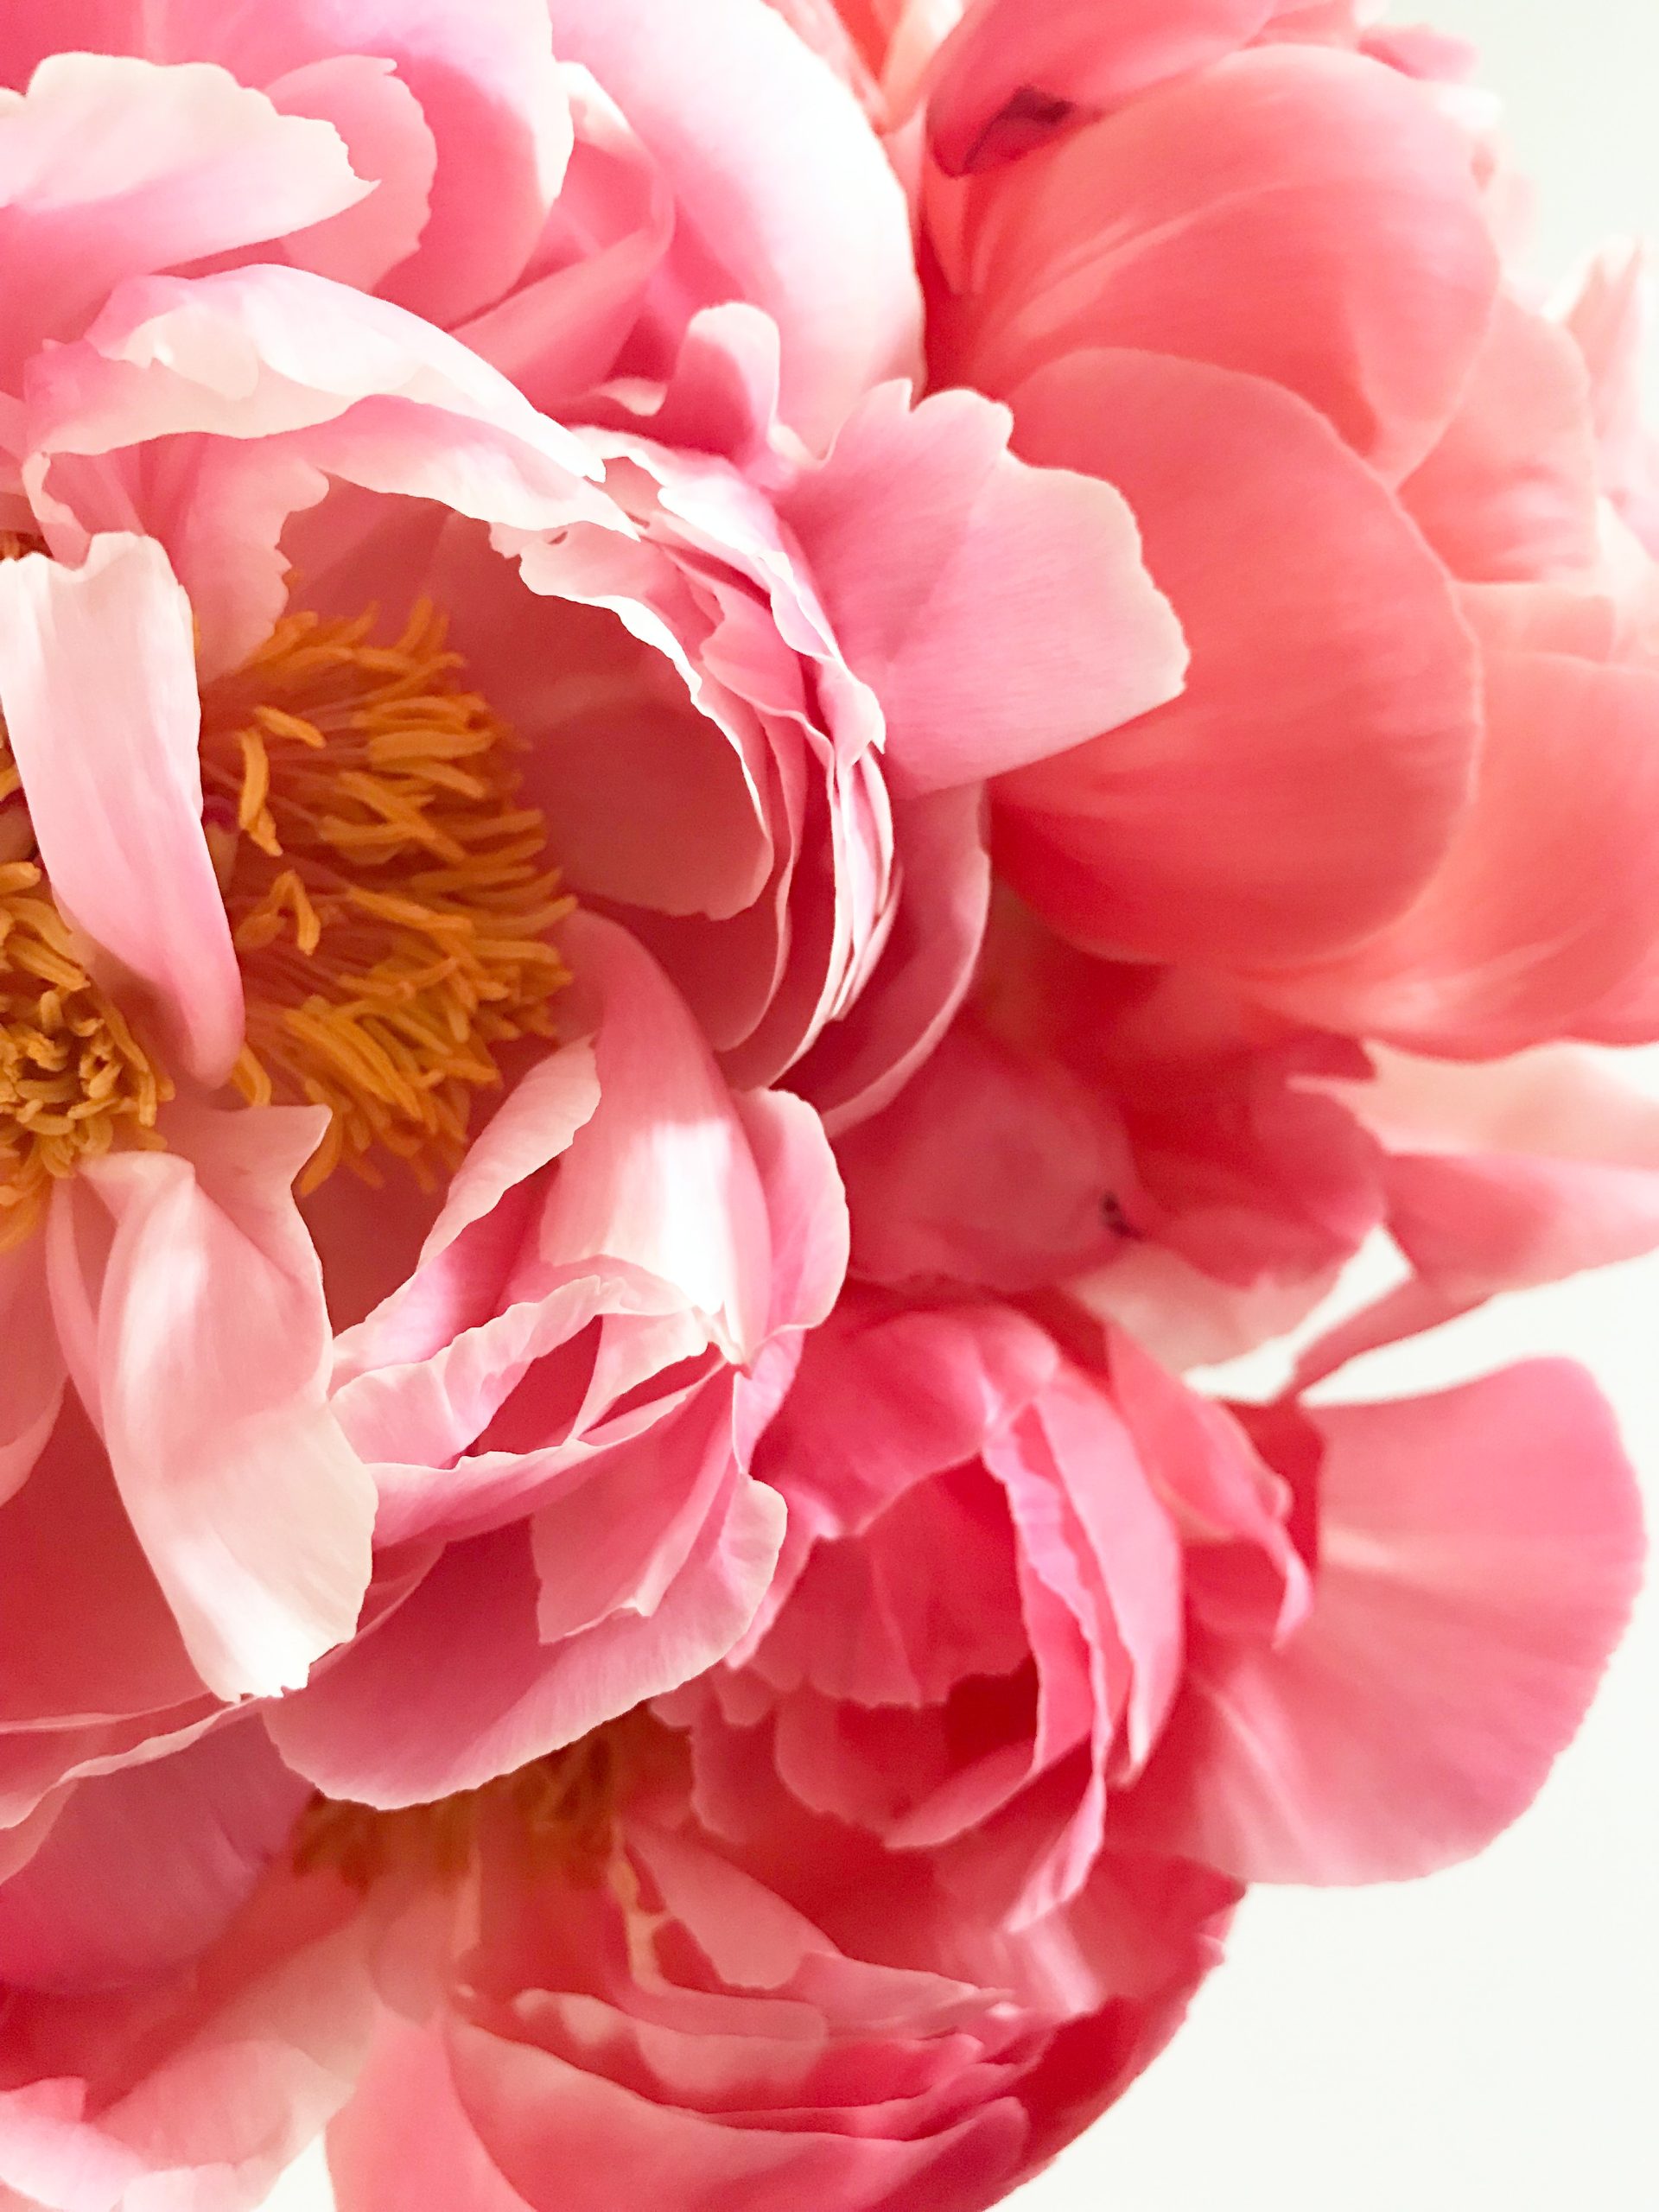 This is the same flower titled Peony. The colorway was so stunning and organic. I am happy to share it with you. xo, Rebecca